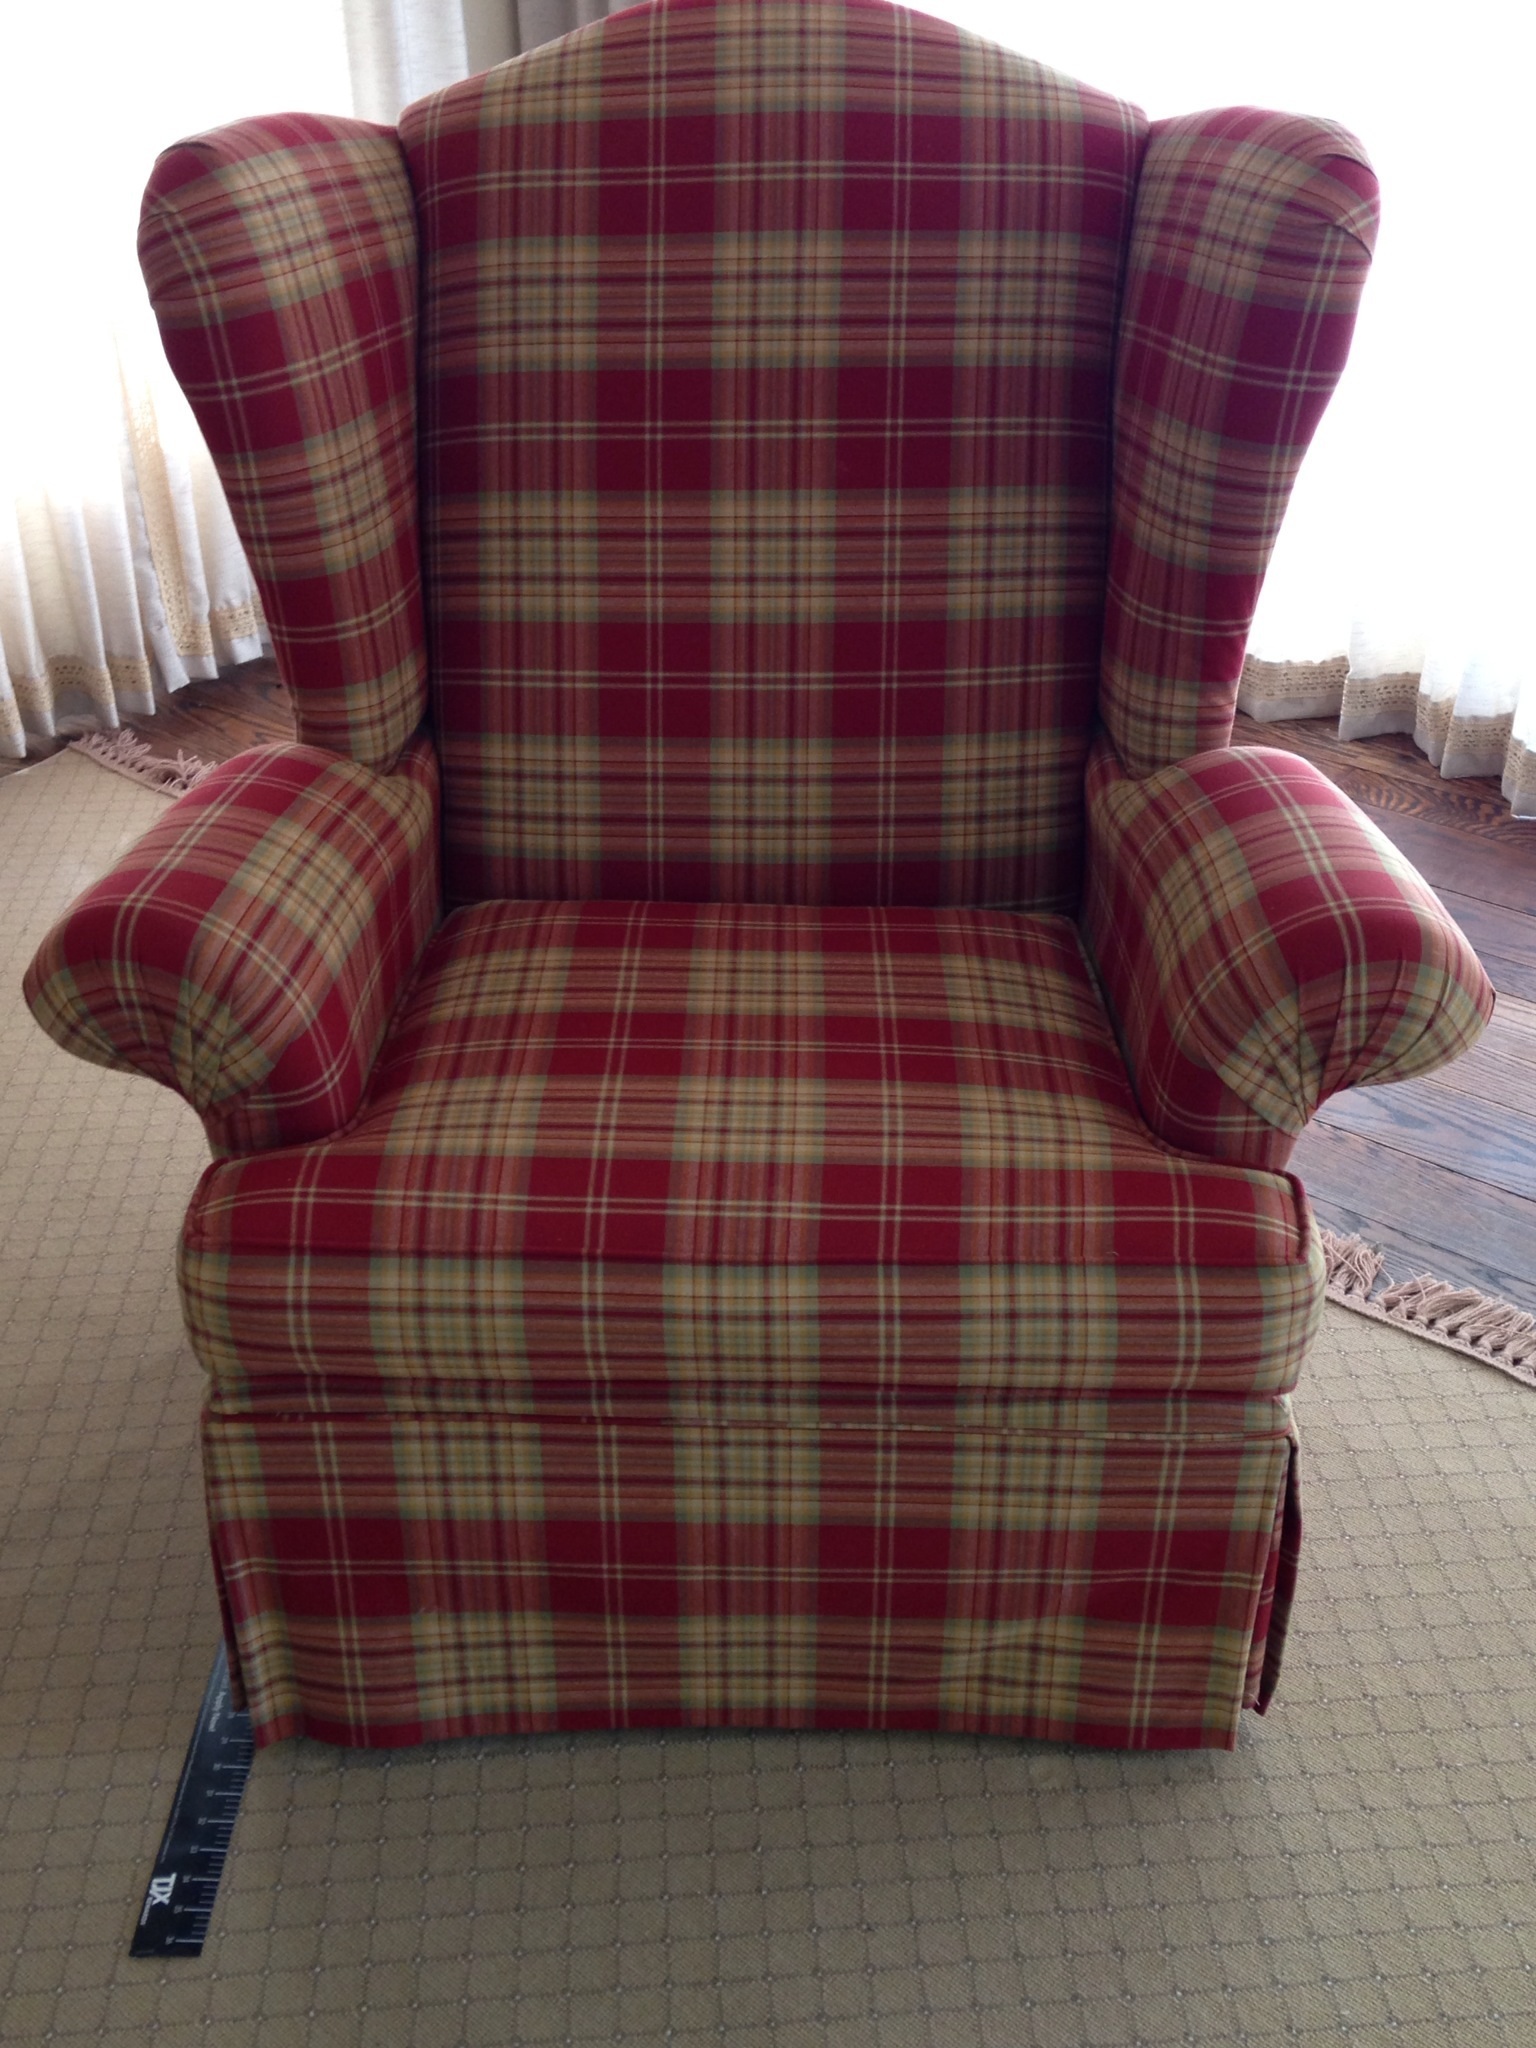 2 Beautiful Red Plaid High-Back Armchairs